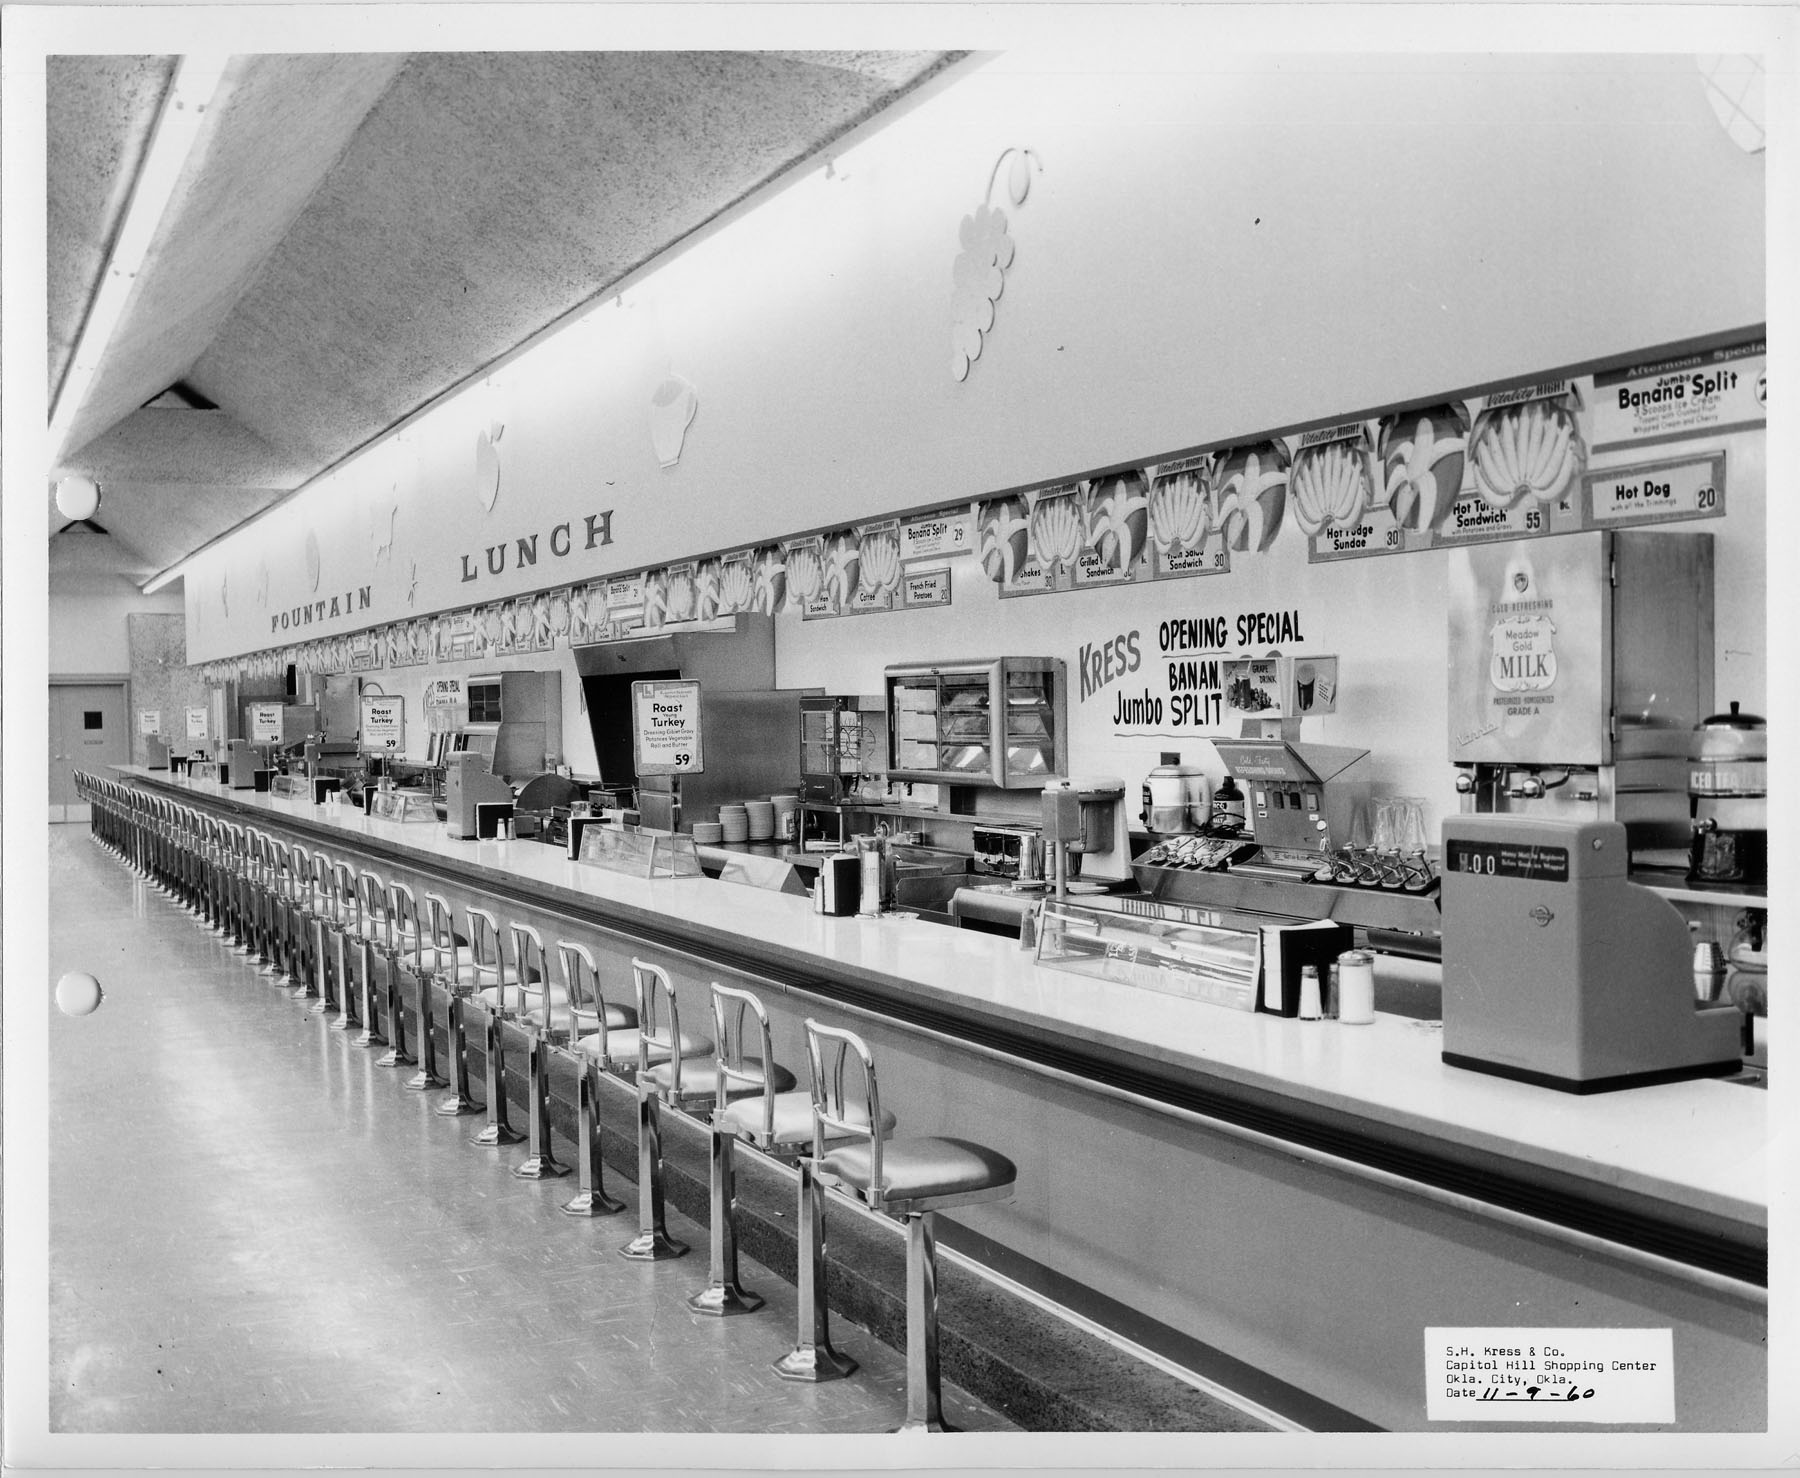 New lunch counter at the Capitol Hill S.H. Kress & Co. store ready for service, November 9, 1960. Photo by Meyers Photo Shop of Oklahoma City, National Building Museum Collection.